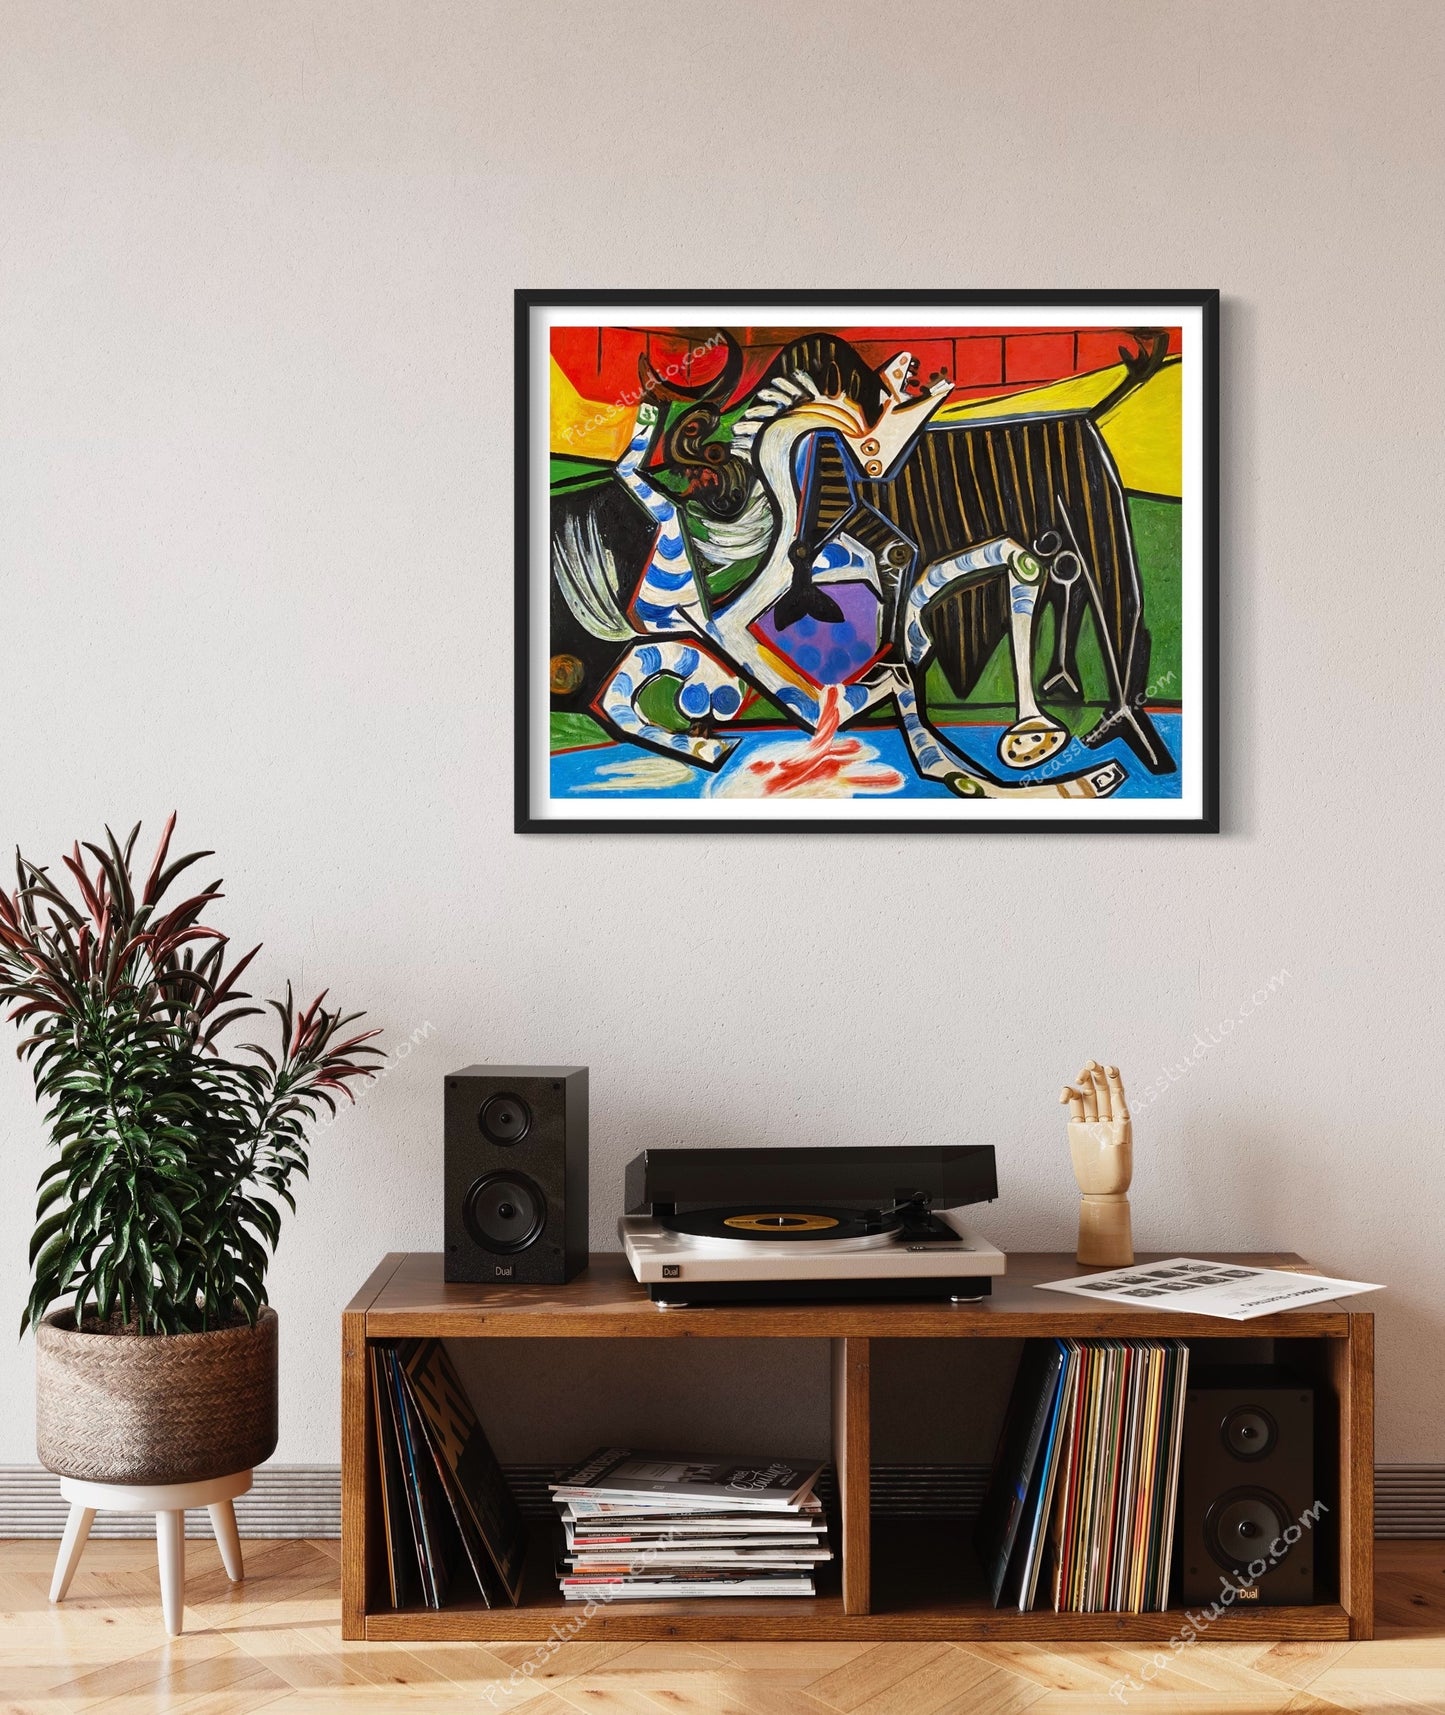 Pablo Picasso Oil Painting Bullfight IV 1934 Hand Painted Art on Canvas Wall Decor Unframed